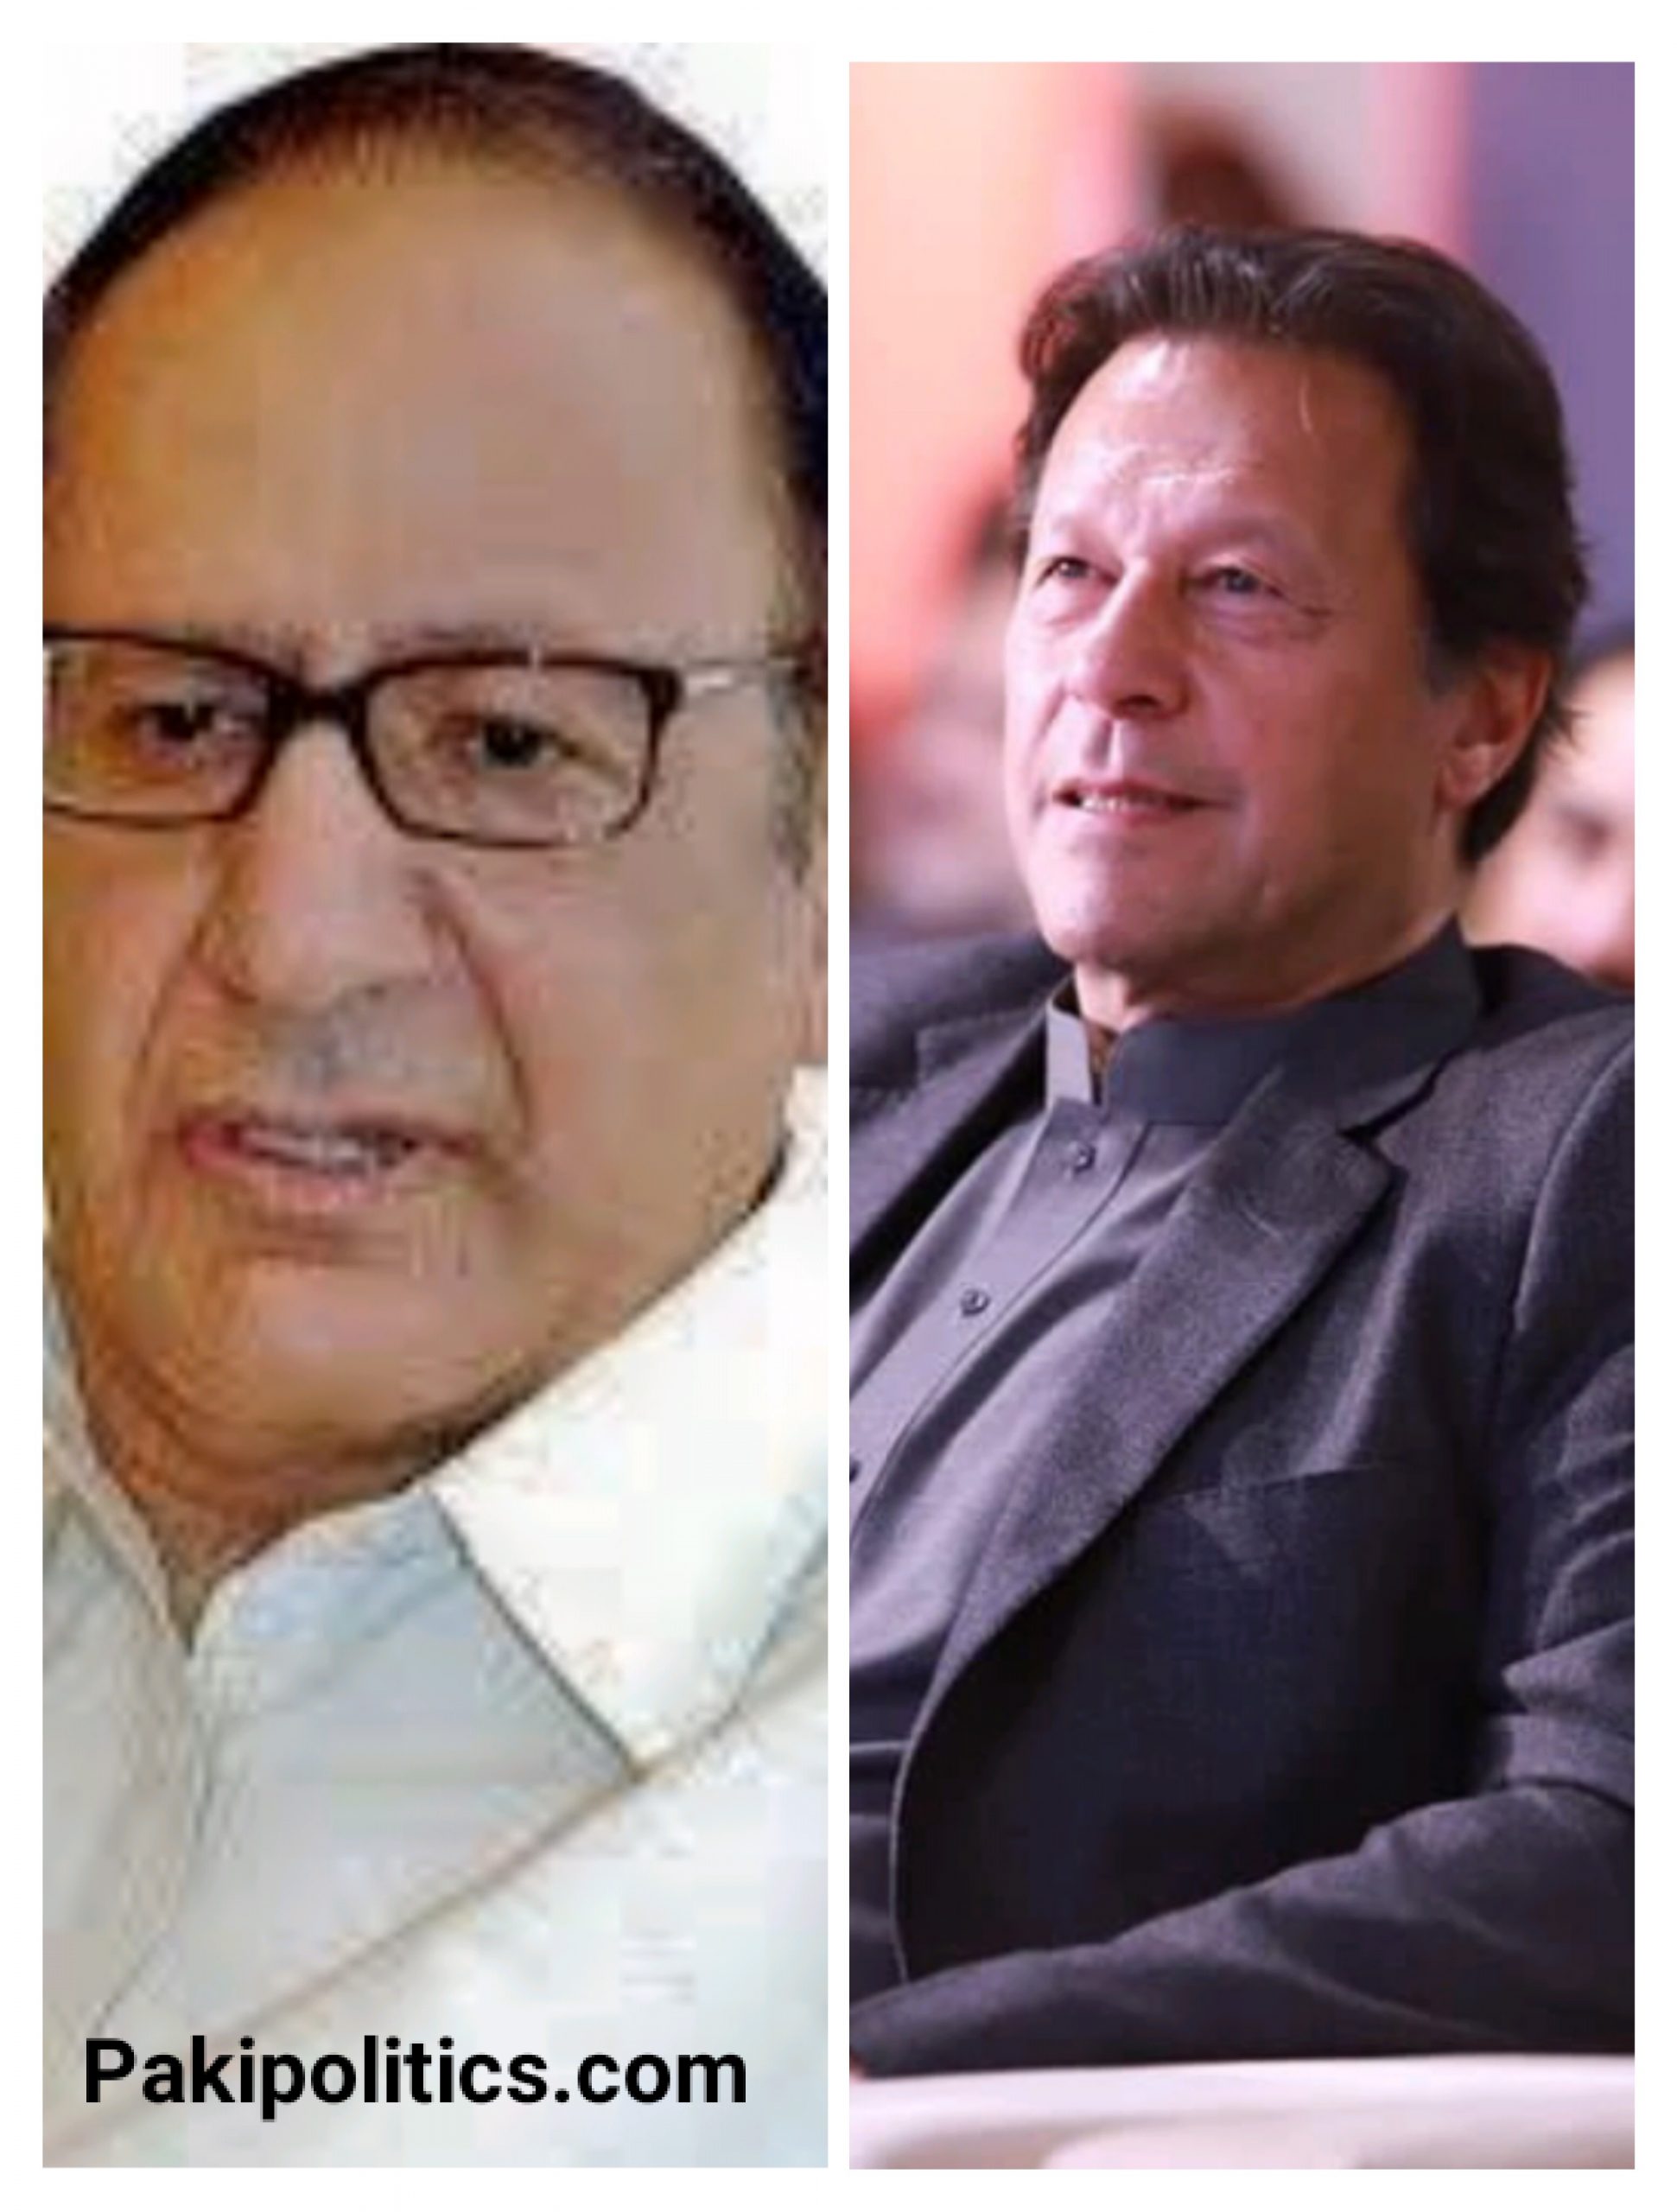 ISLAMABAD PML-Q leader Chaudhry Shujaat Hussain has advised the Prime Minister to be wary of advisers and spokespersons.